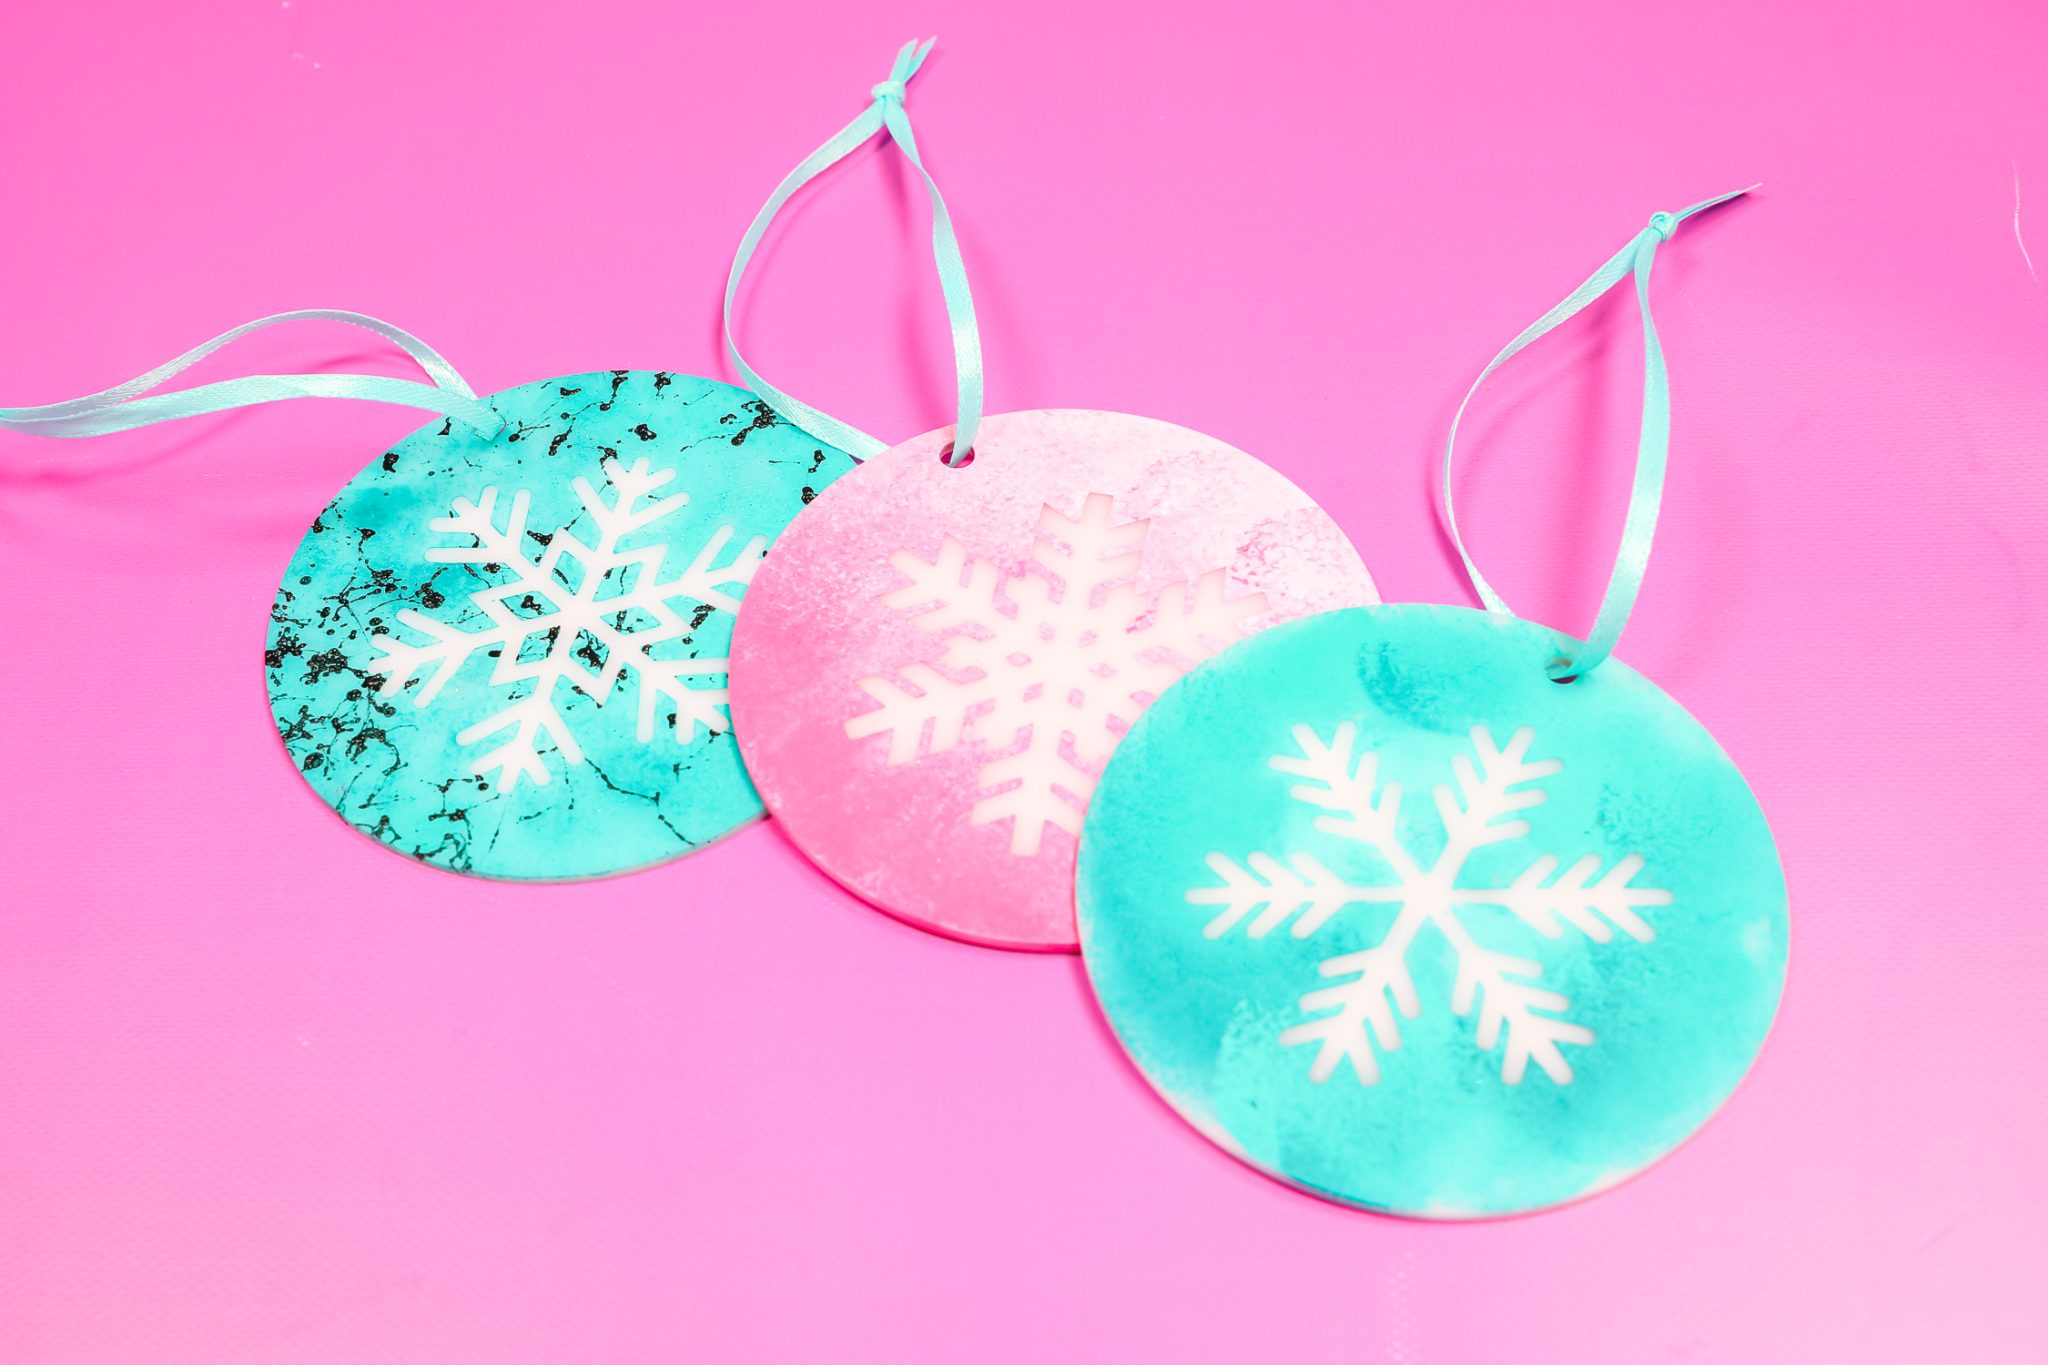 finished hot mess paint ornaments